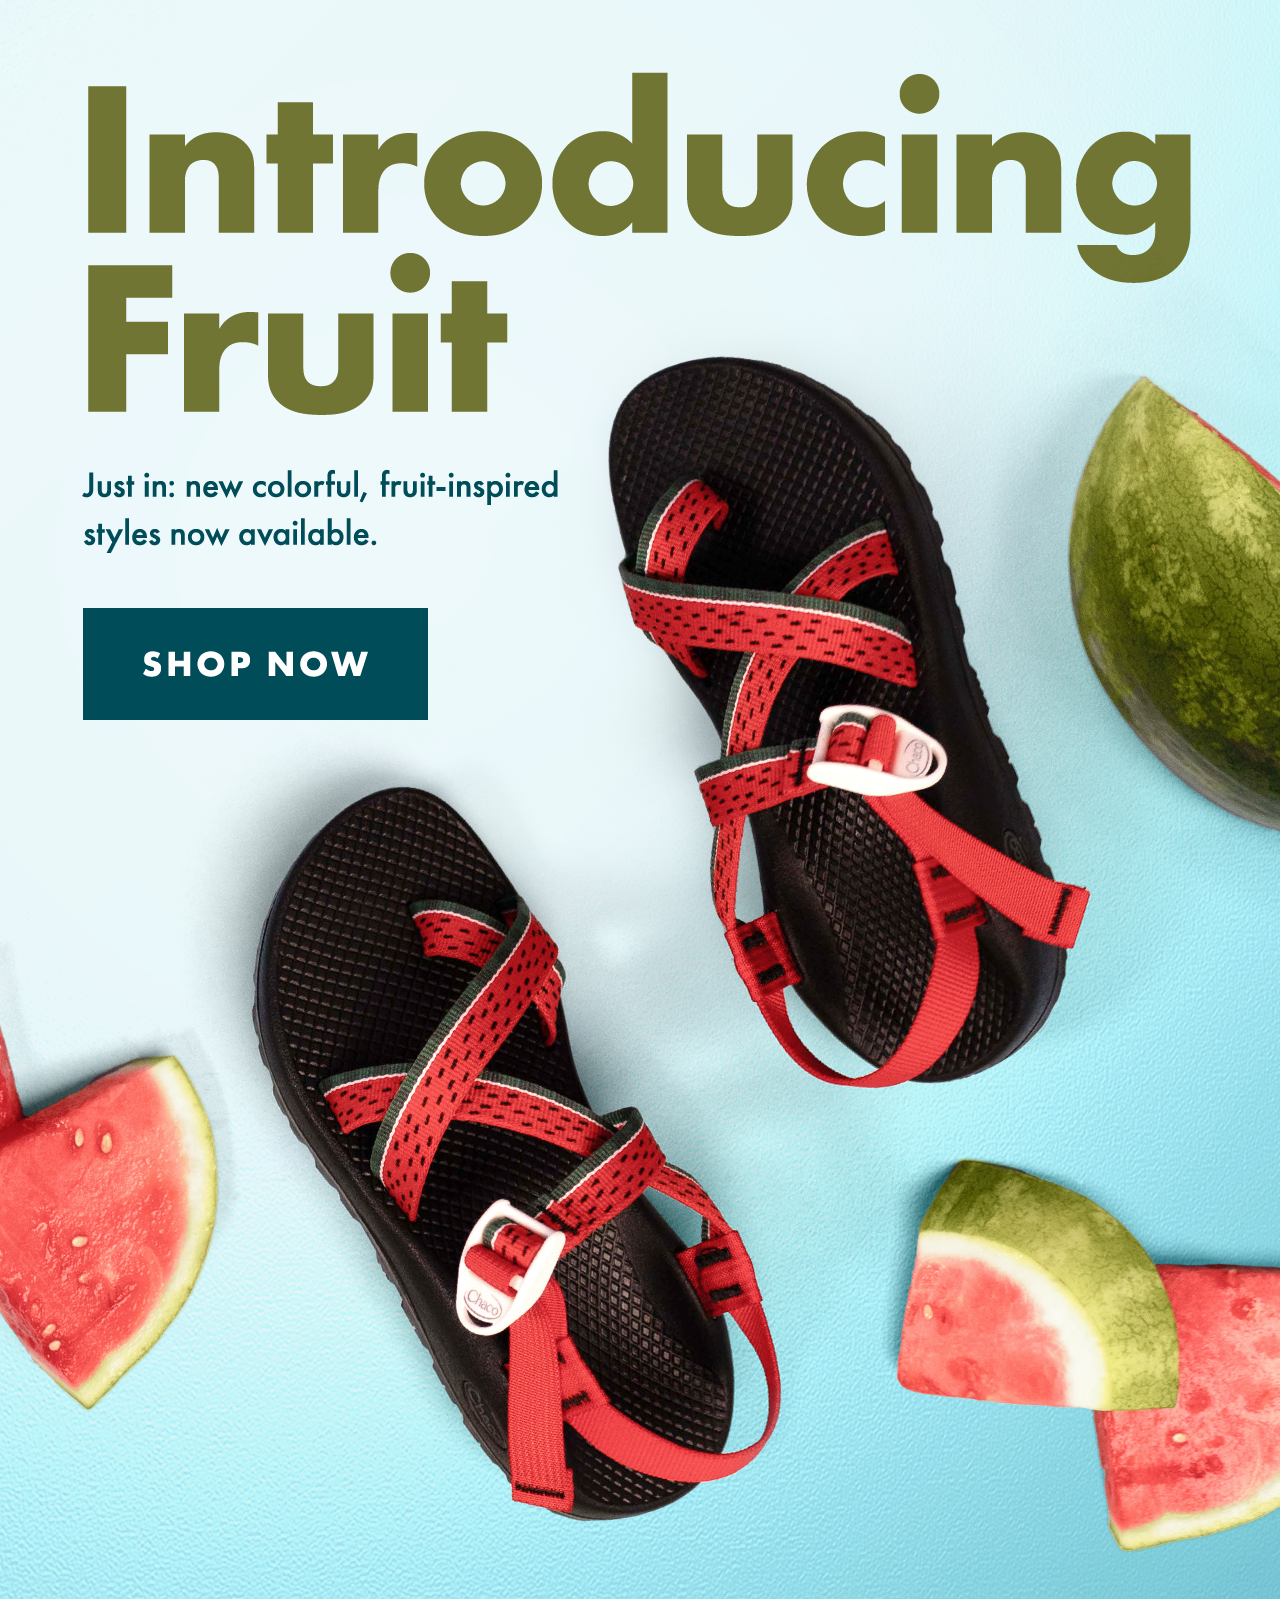 Introducing Fruit. Just in: new colorful, fruit-inspired styles now available. SHOP NOW